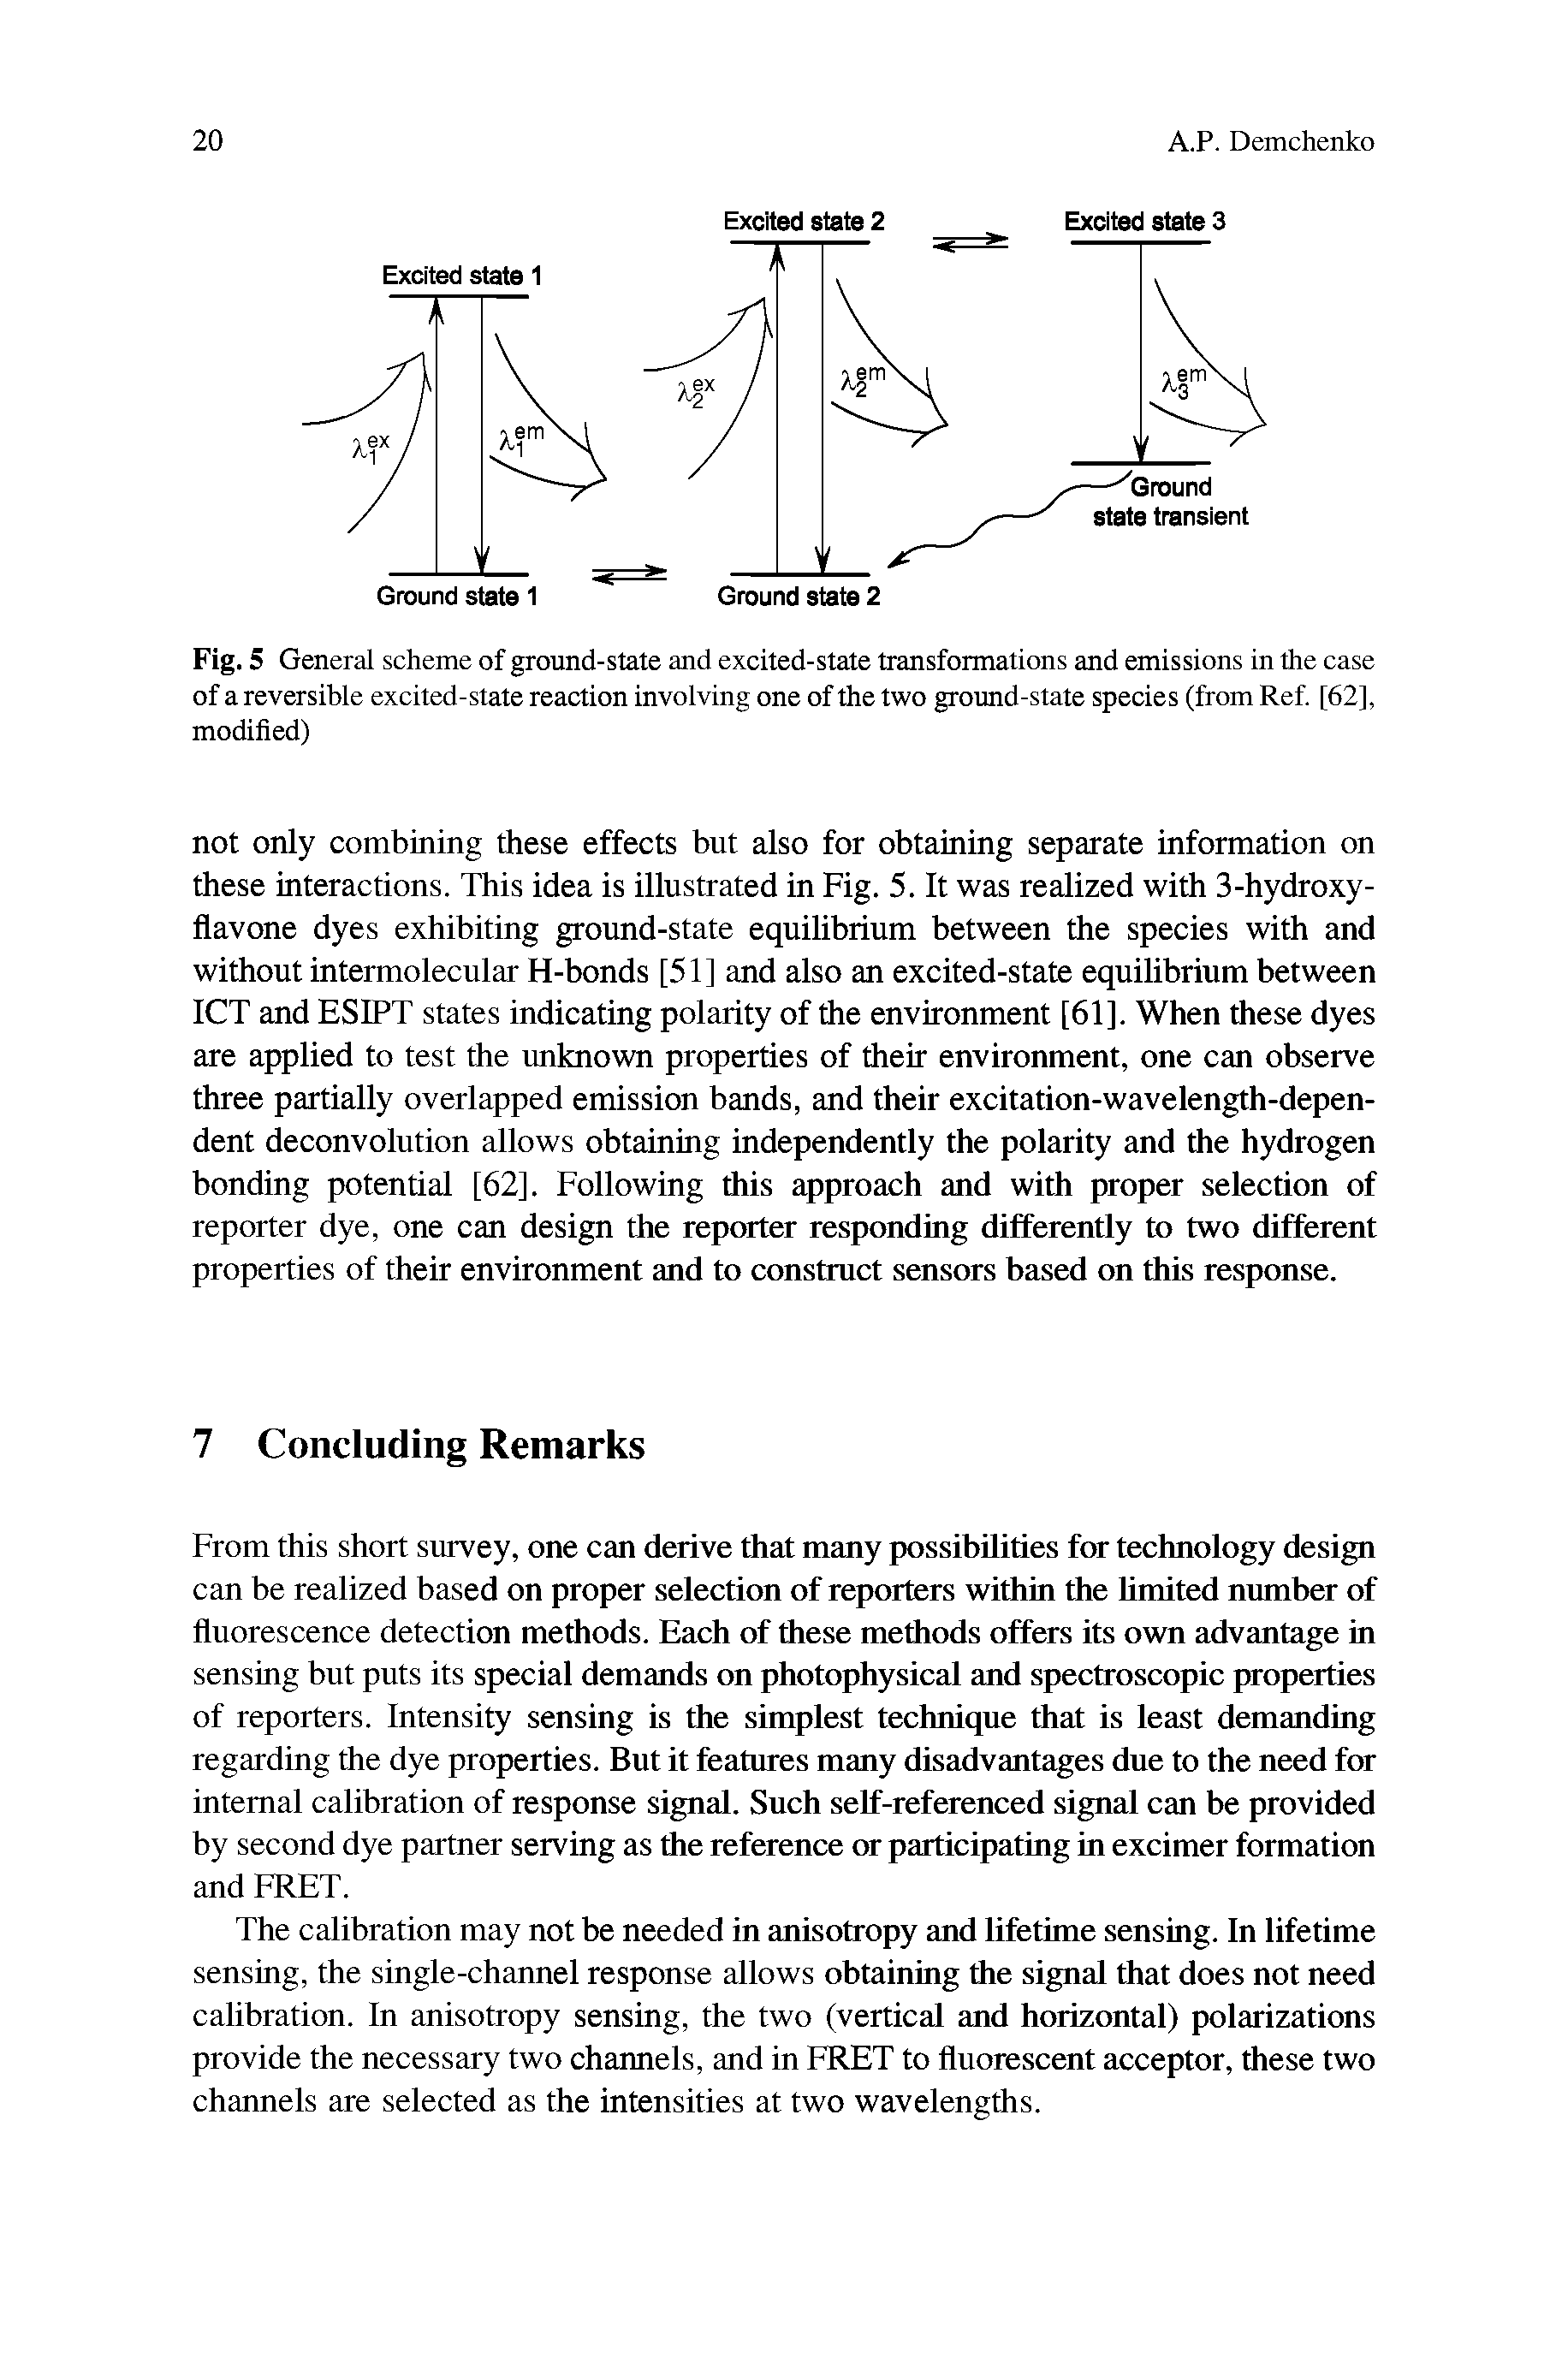 Fig. 5 General scheme of ground-state and excited-state transformations and emissions in the case of a reversible excited-state reaction involving one of the two ground-state species (from Ref. [62], modified)...